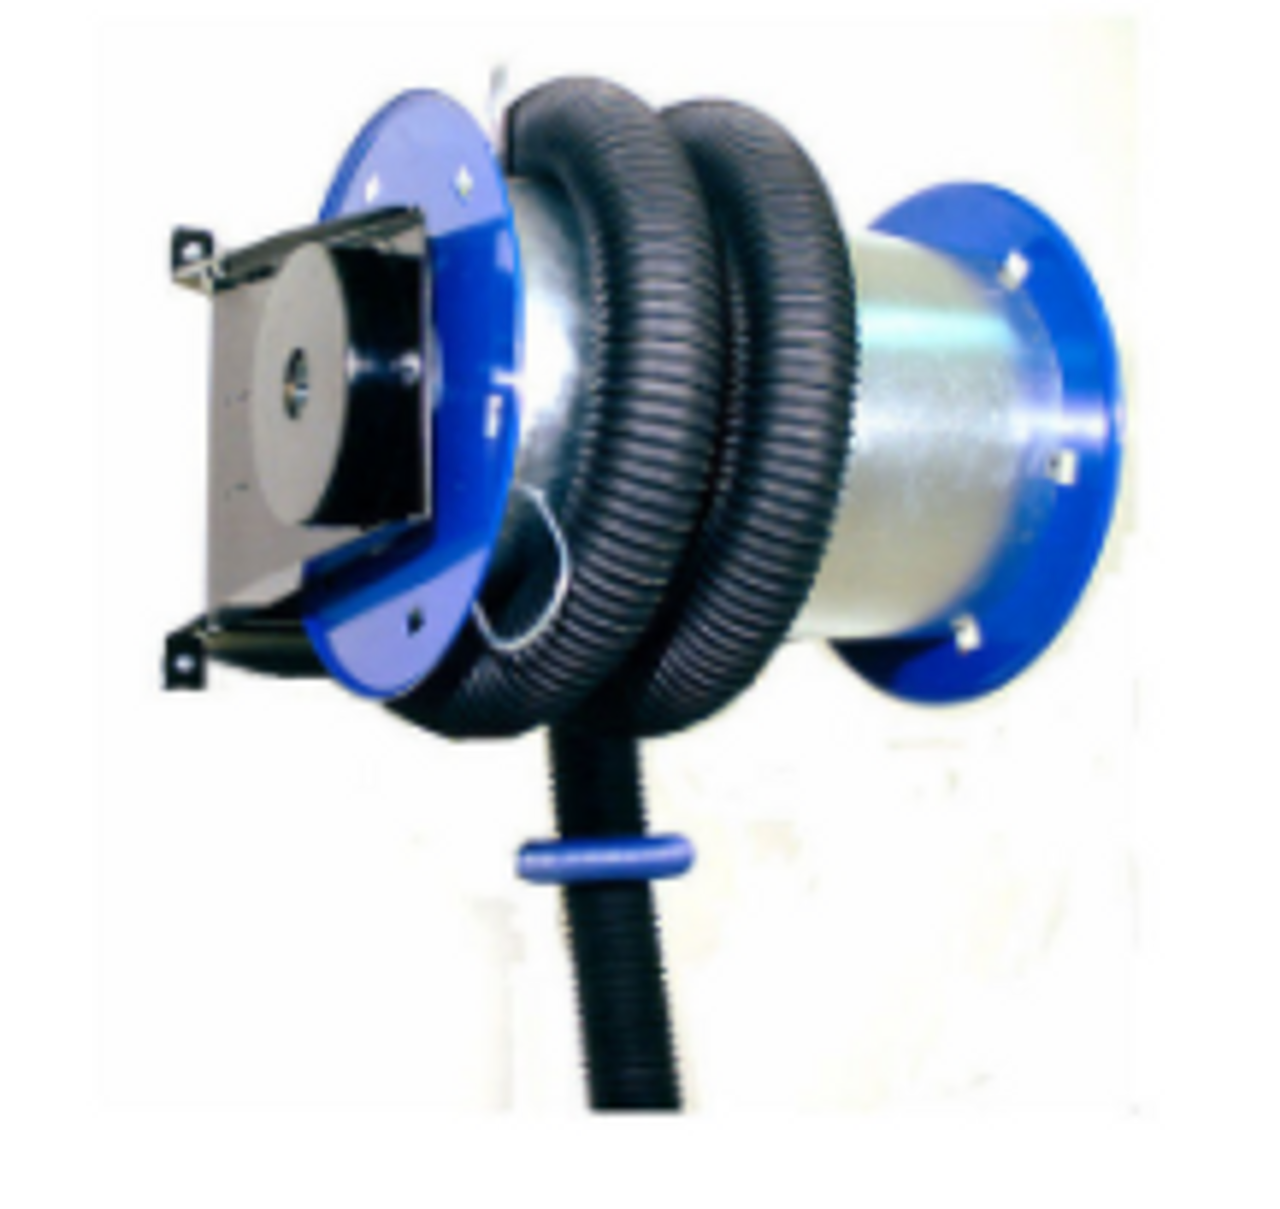 Exhaust Hose Reel Systems for Fumes and Gases